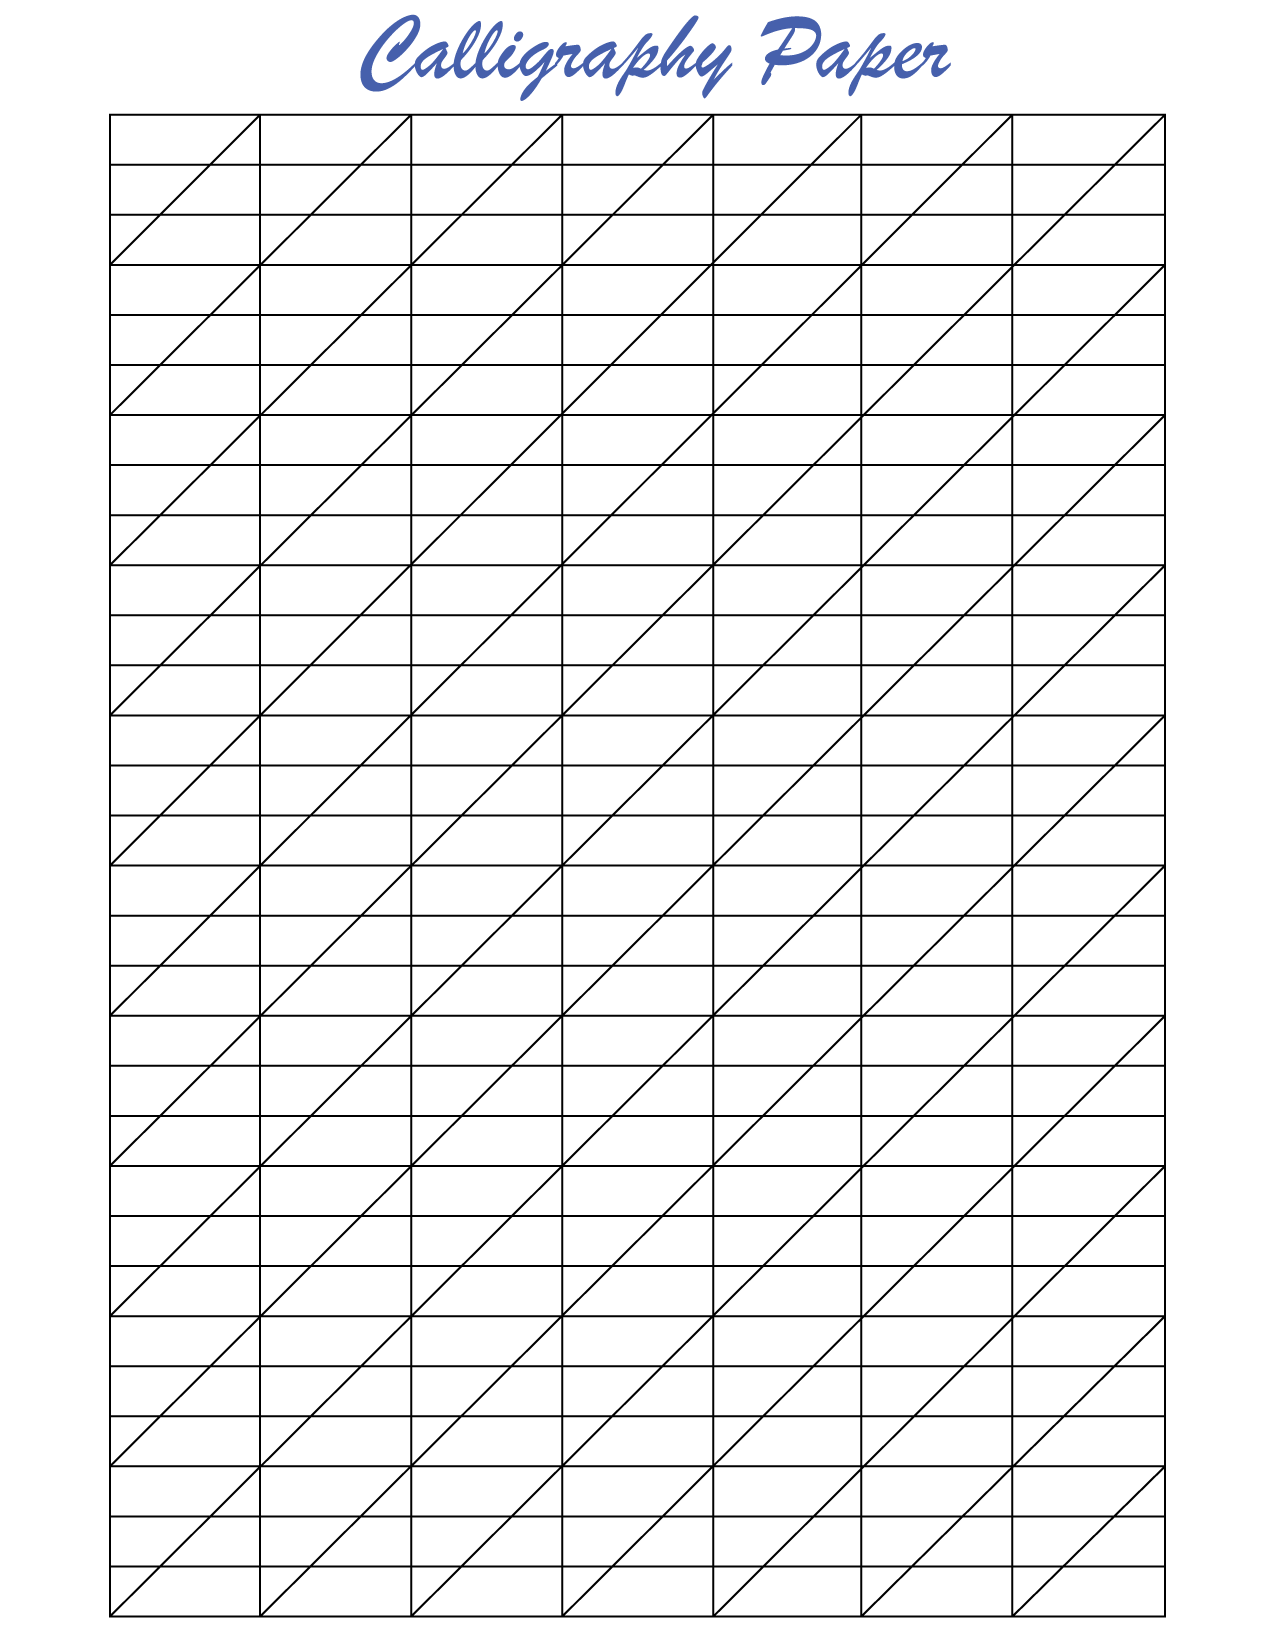 Blank calligraphy paper to print out